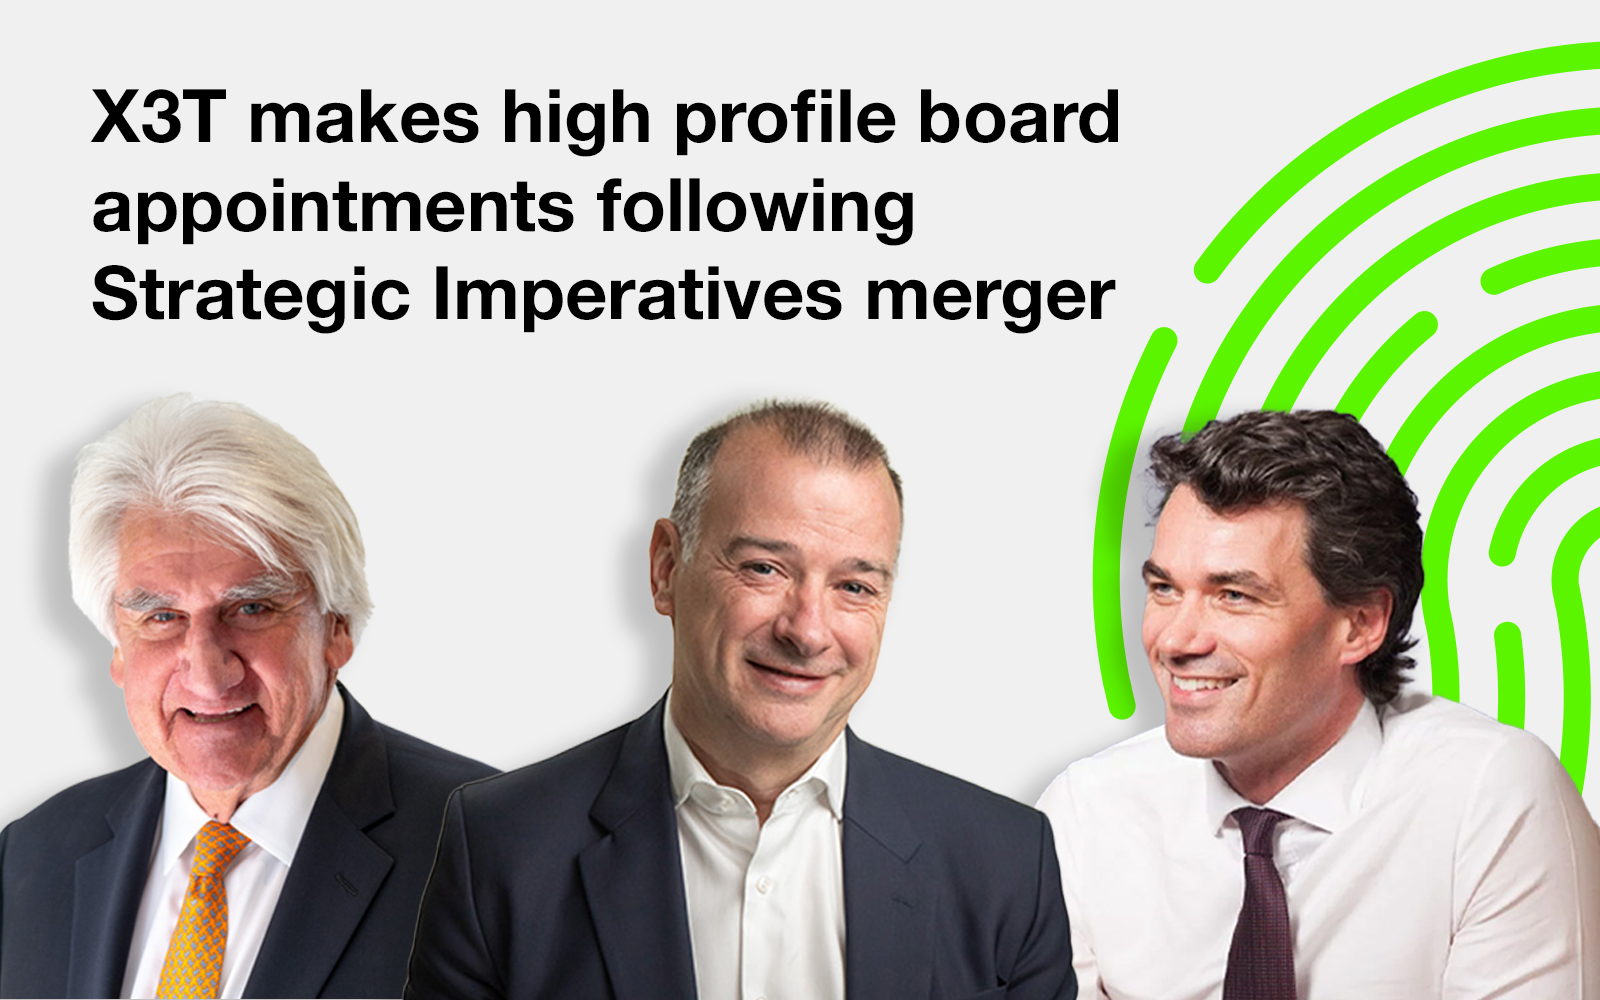 X3T makes high profile board appointments following Strategic Imperatives merger